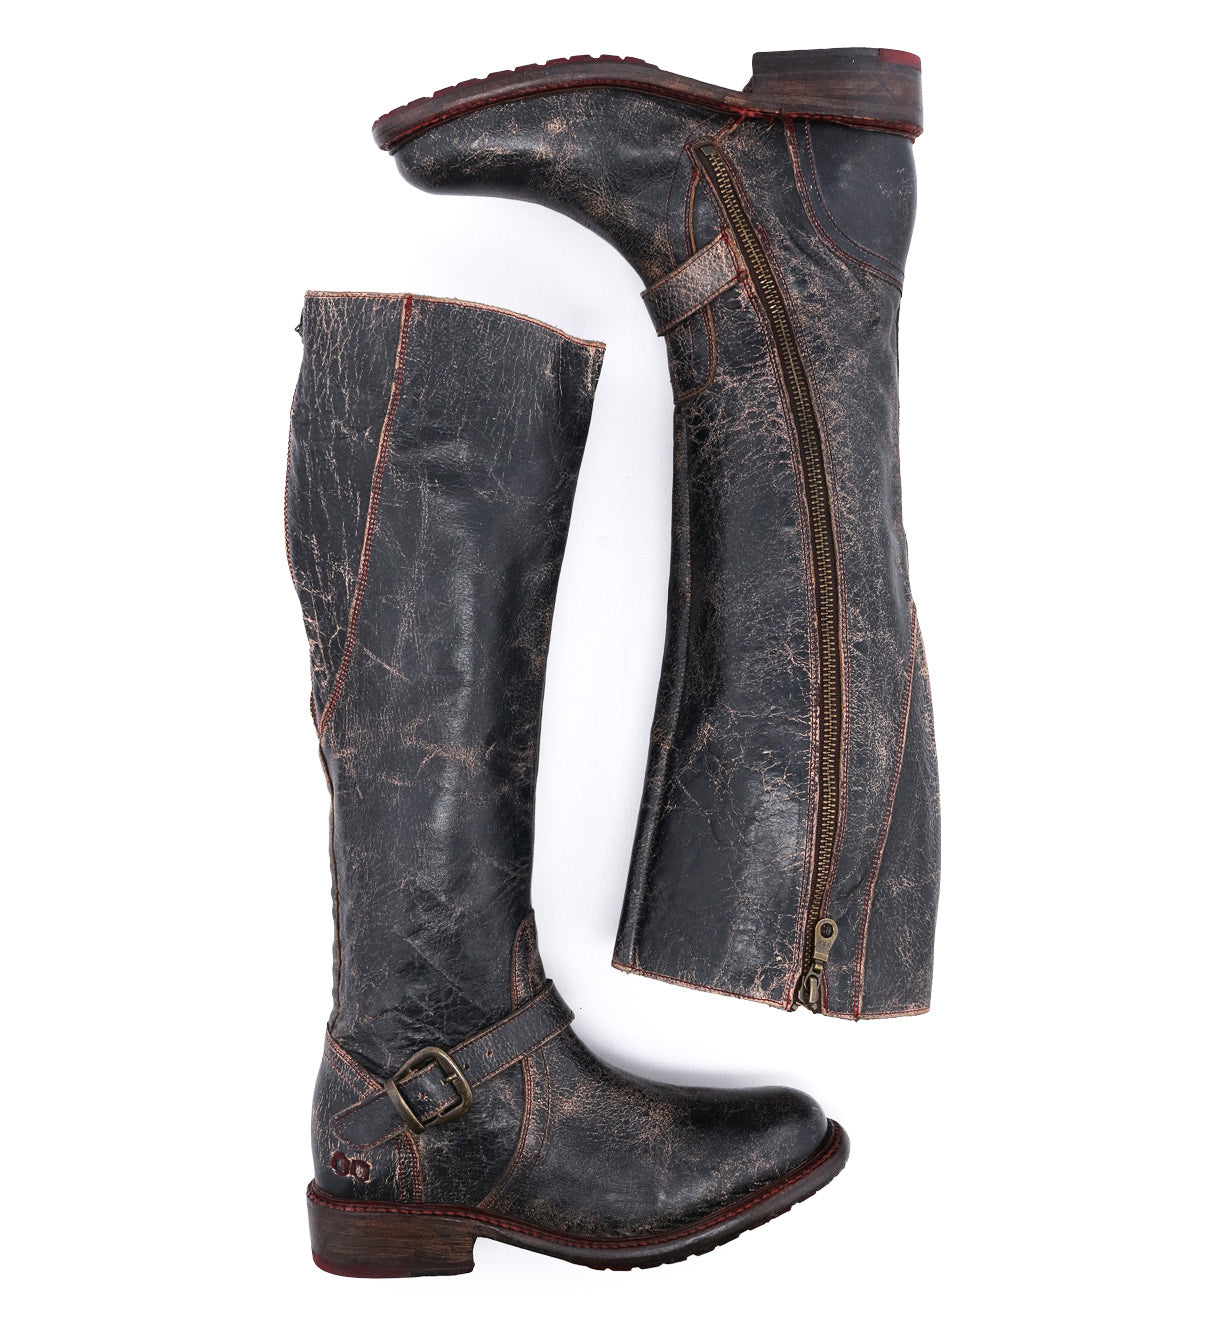 A pair of Bed Stu women's Glaye boots with zippers on the side.